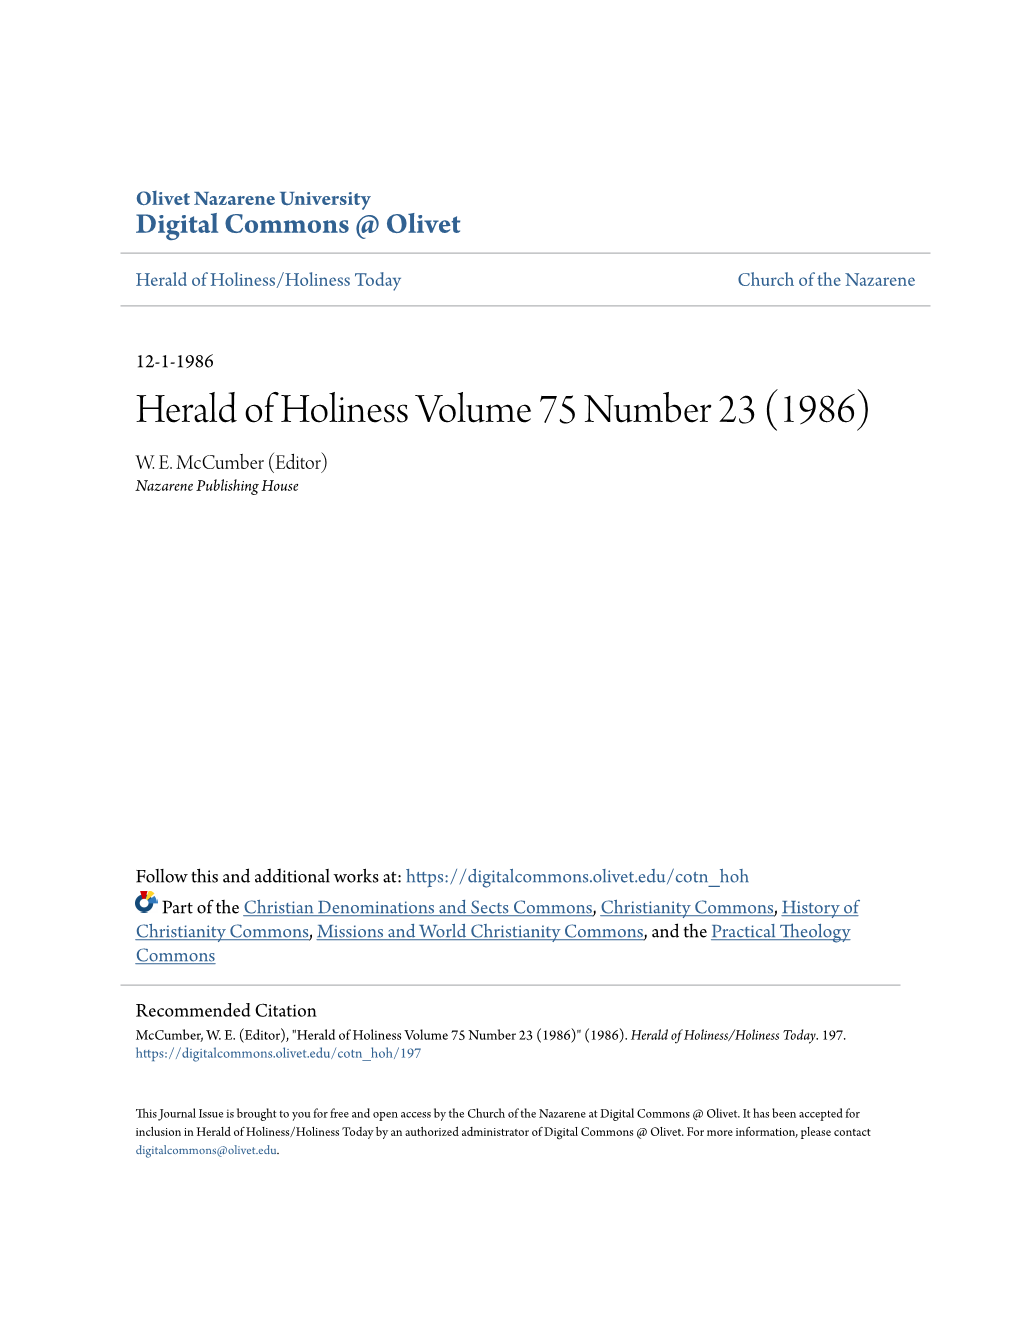 Herald of Holiness Volume 75 Number 23 (1986) W